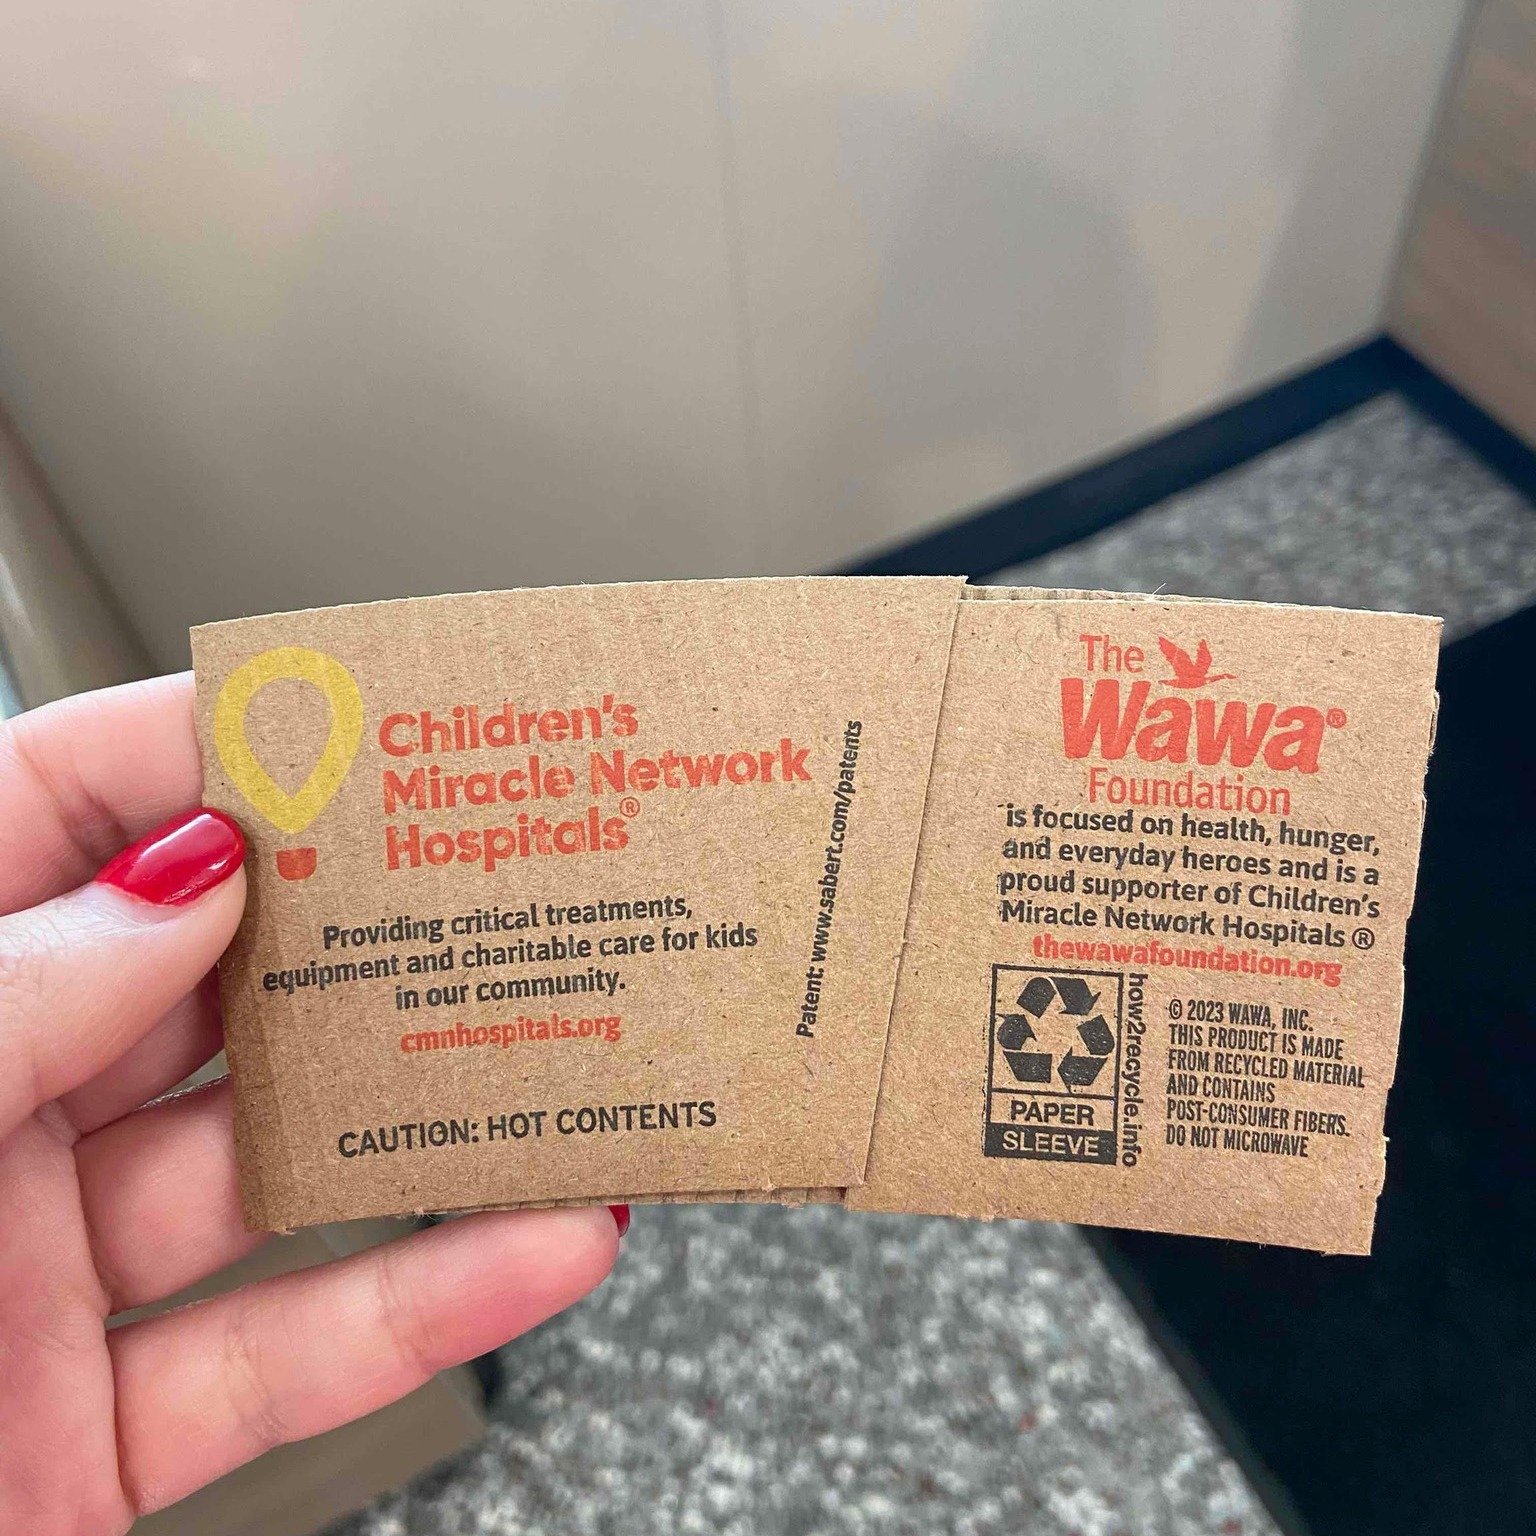 Thank you @wawa for your support of the pediatric units at @ufhealthjax and @wolfsonchildren! There is still time to #changekidshealth #changethefuture for kids in our community by visiting your local Wawa until May 26. #kidscantwait